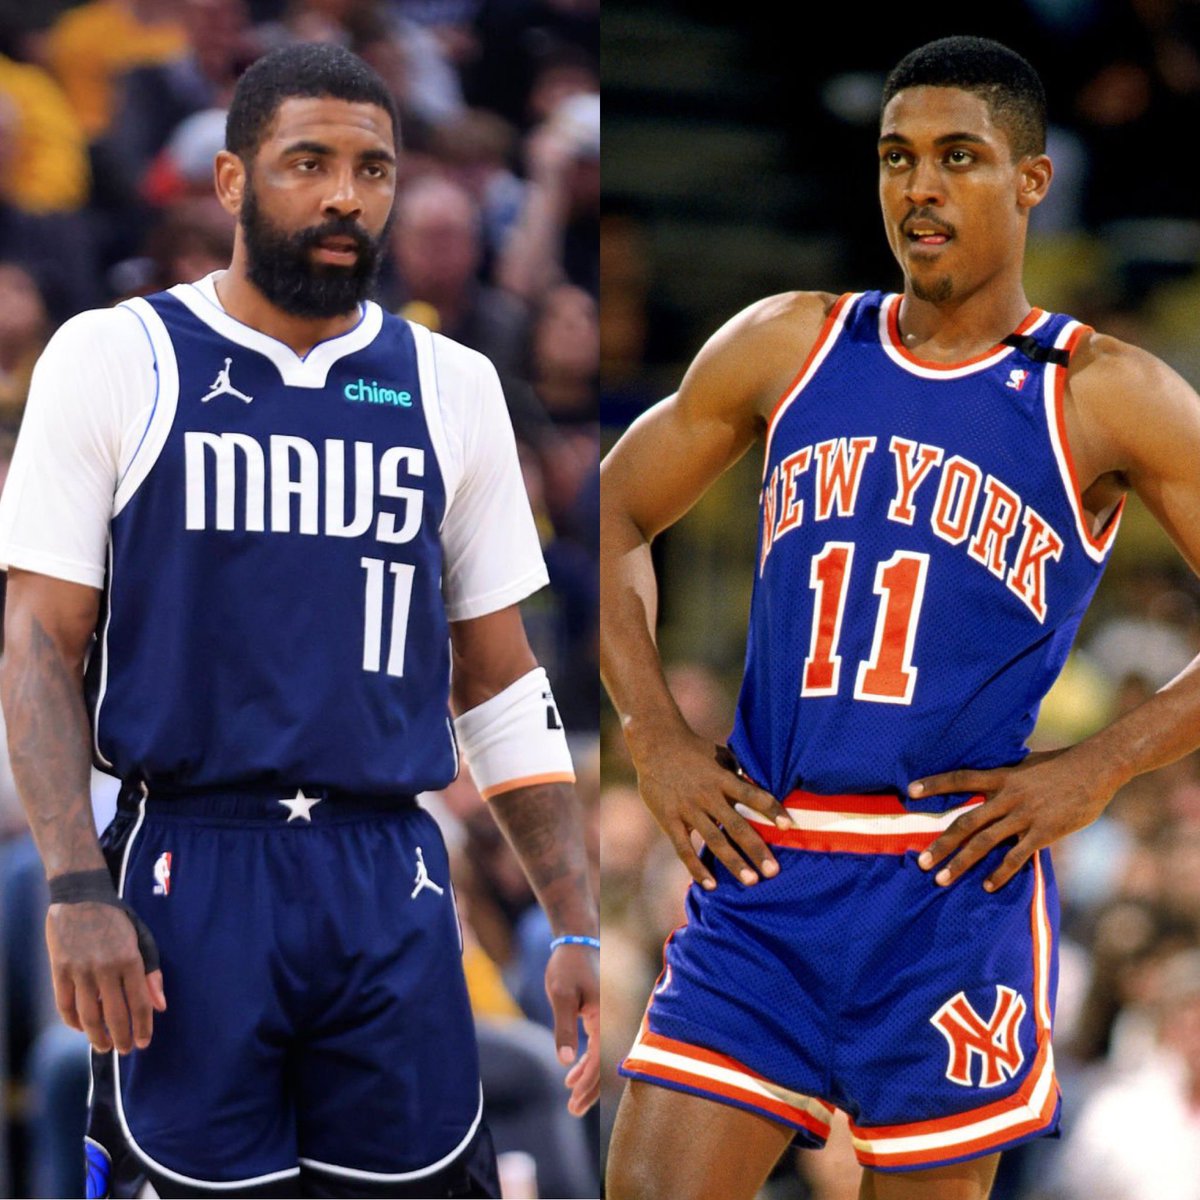 “Kyrie Irving and Rod Strickland: the two best below the rim finishers in NBA history” — Stan Van Gundy